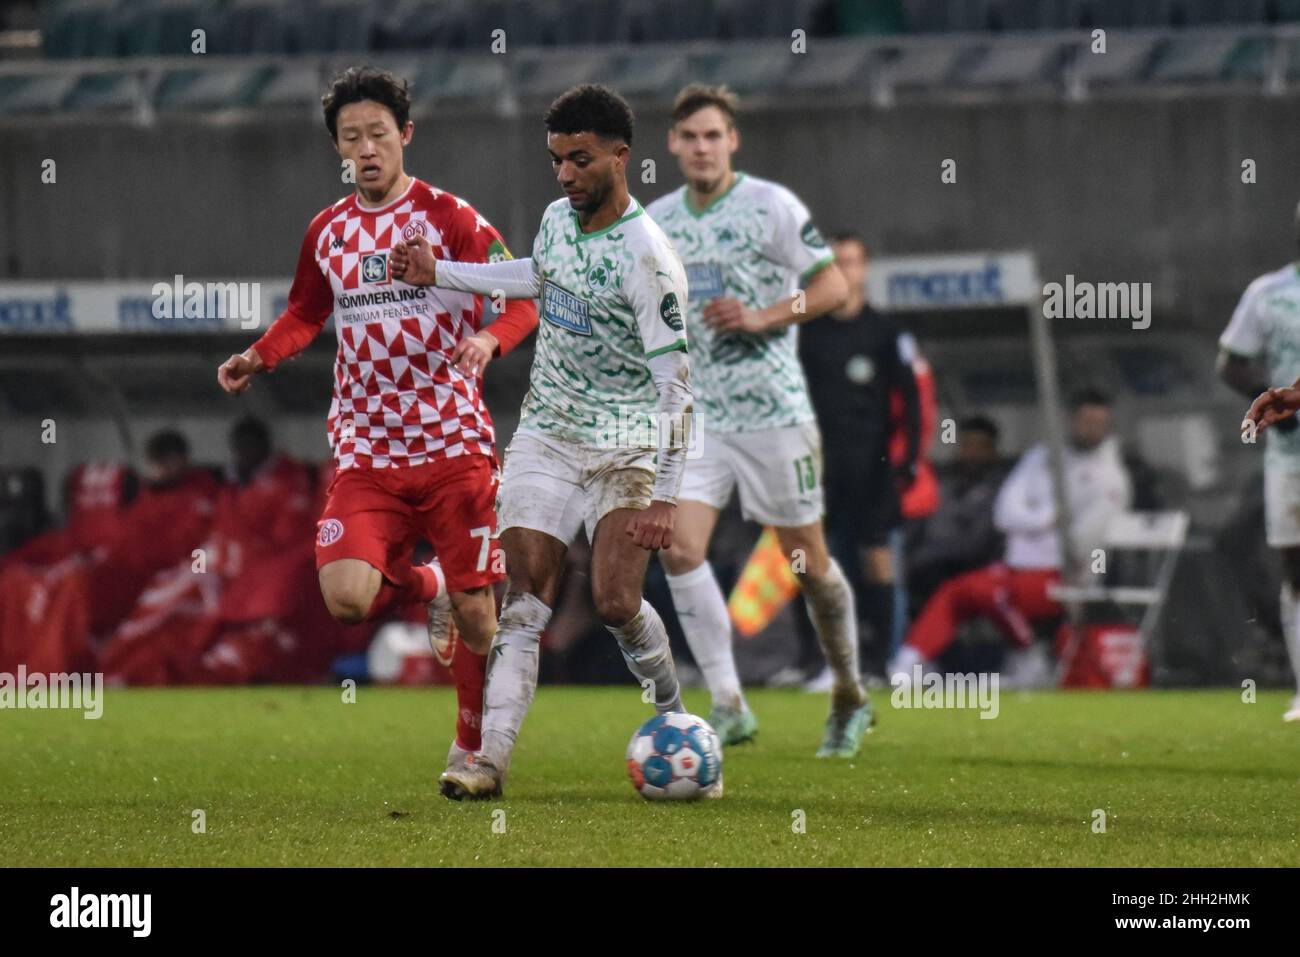 Germany ,Fuerth, Sportpark Ronhof Thomas Sommer - 22 Jan 2022 - Fussball, 1.Bundesliga - SpVgg Greuther Fuerth vs. FSV Mainz 05  Image: (fLTR) Jae-Sung Lee (Mainz, 7), Timothy Tillman (SpVgg Greuther Fürth,21)  DFL regulations prohibit any use of photographs as image sequences and or quasi-video Stock Photo